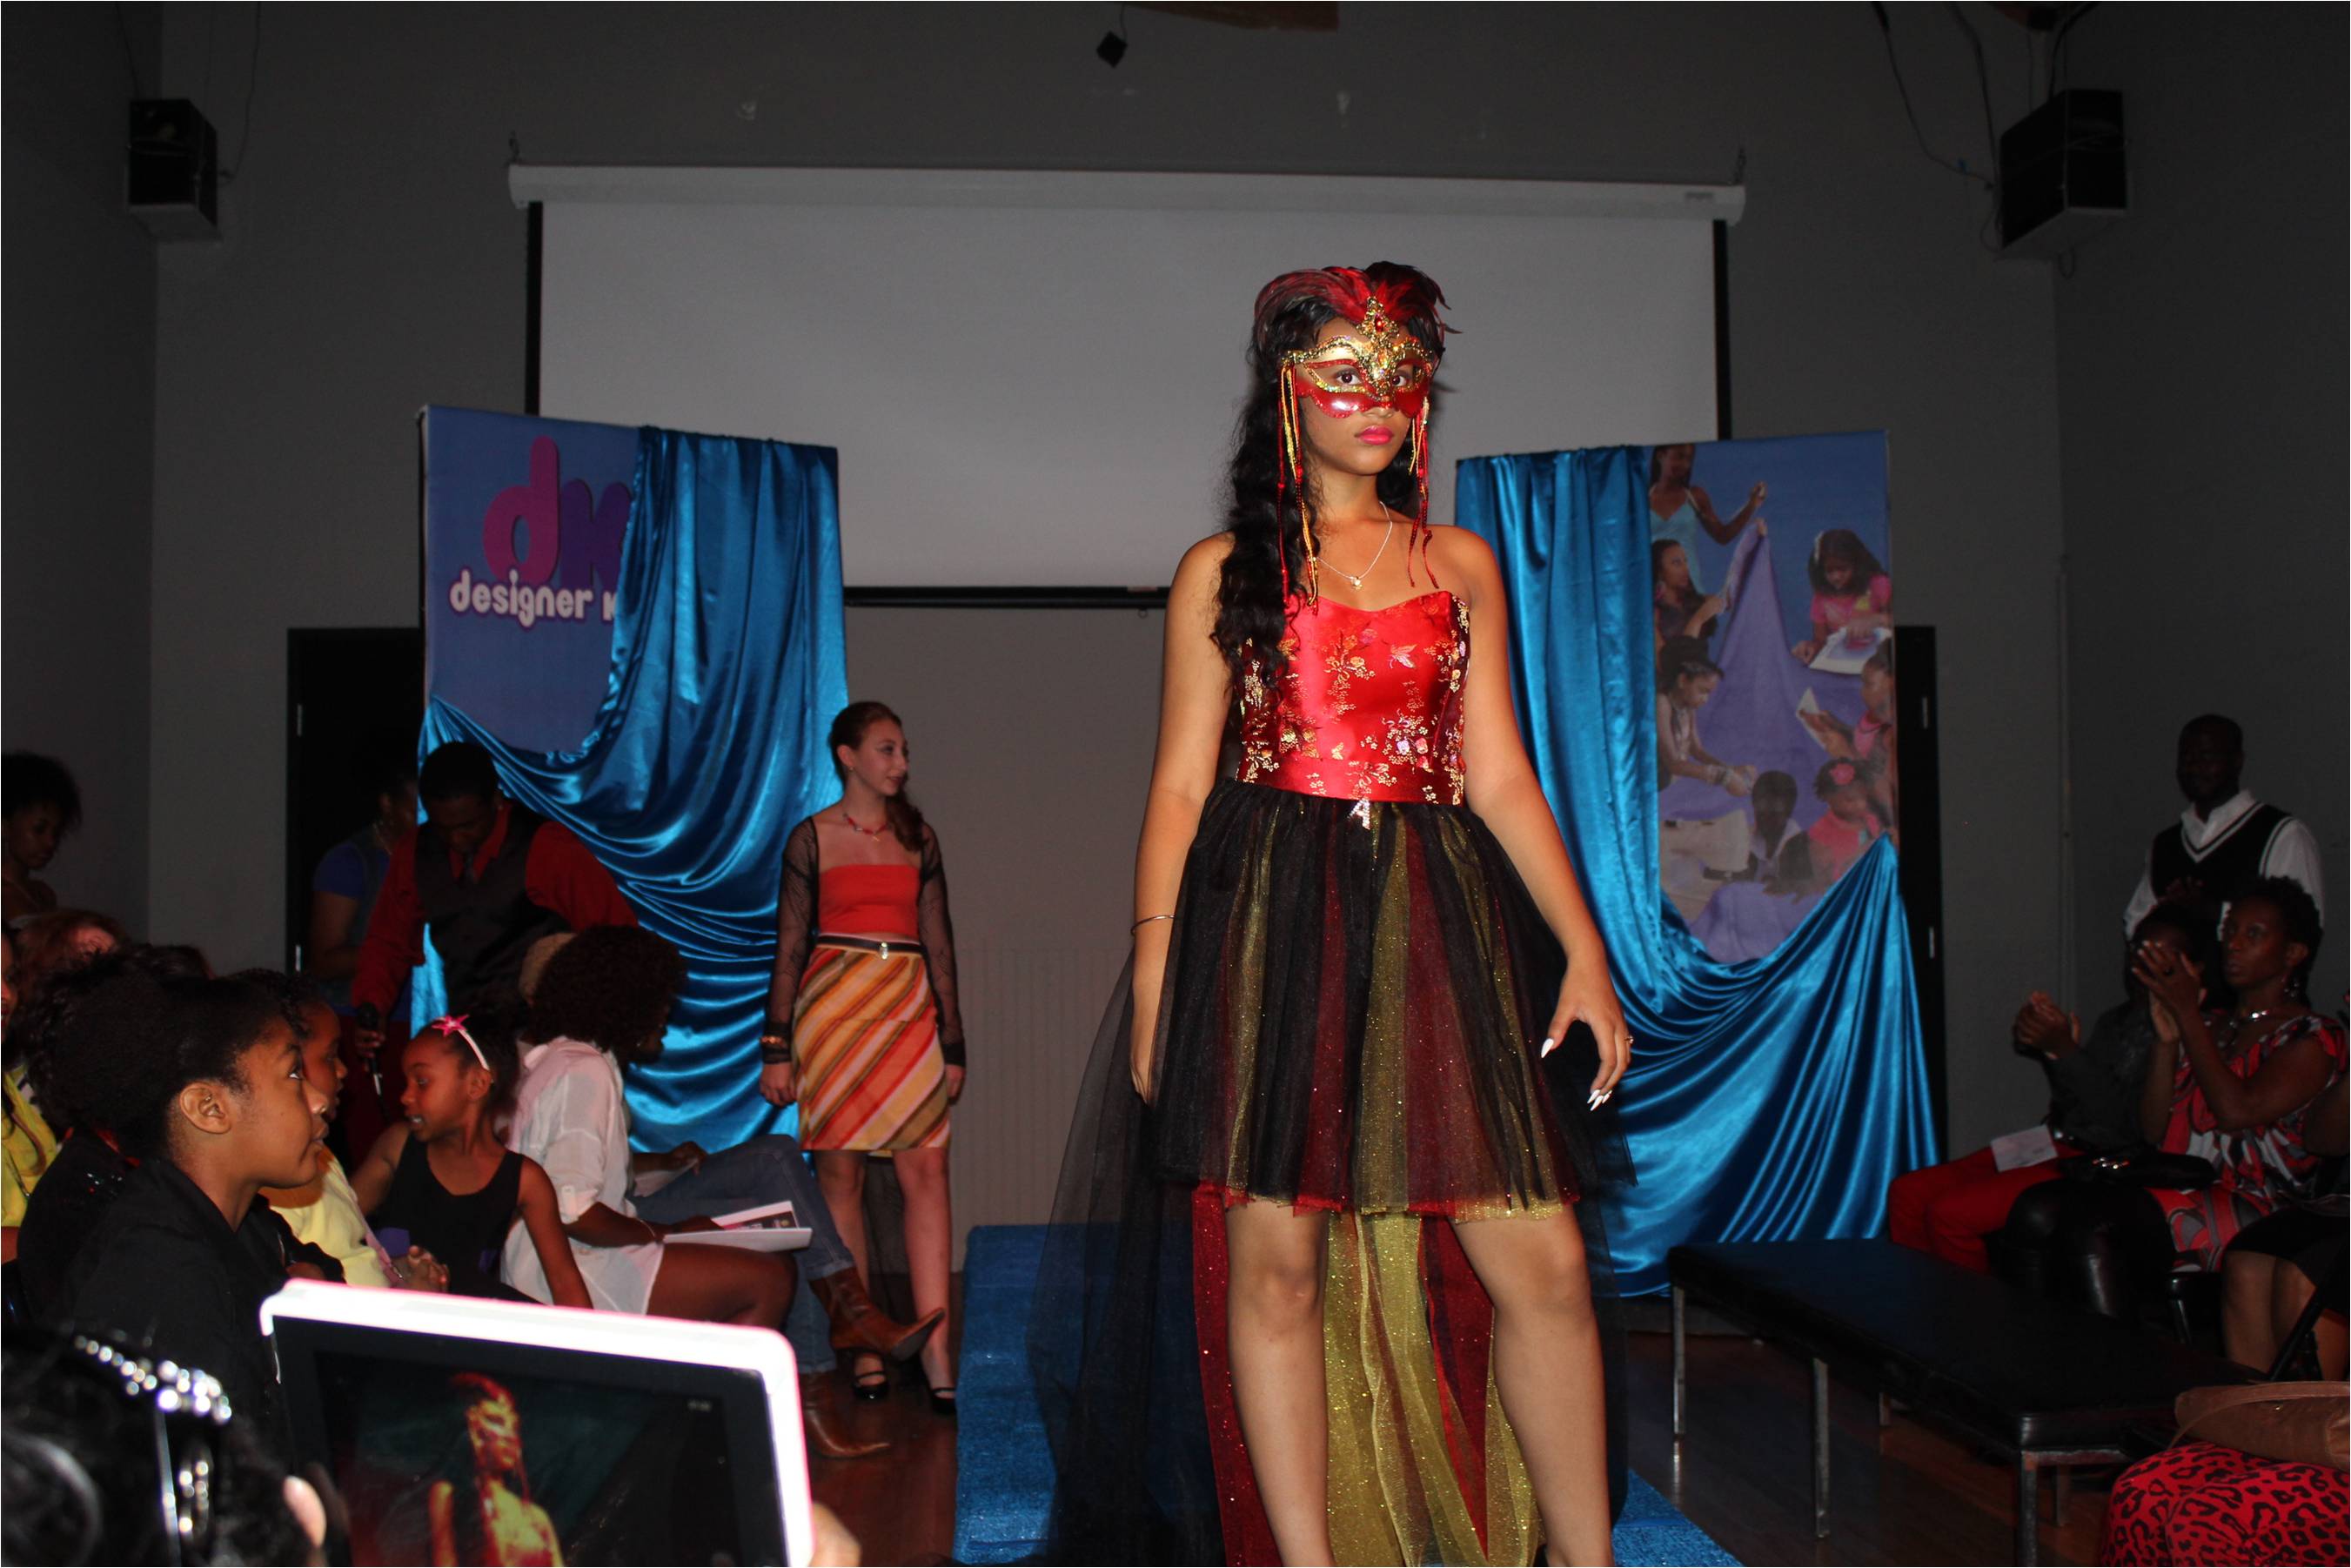 Aliyah Royale hits the runway for Designer Kids in a gown she designed and sewed.